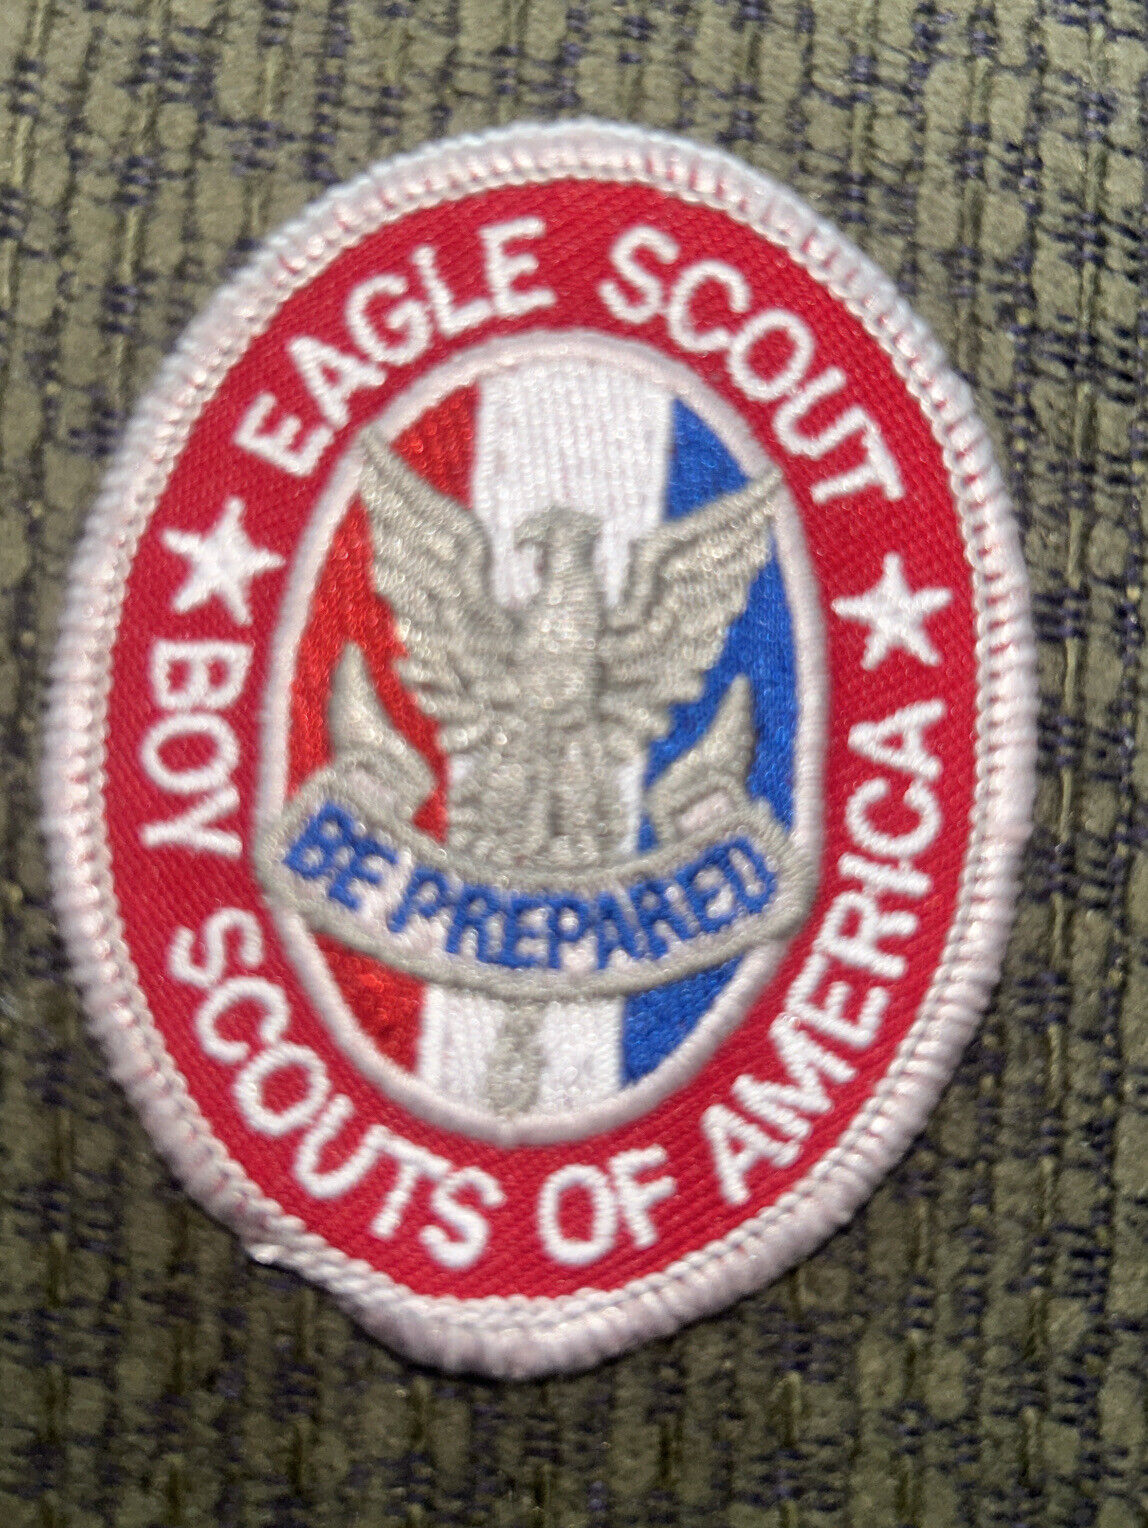 Recent Issue  Eagle Scout Rank Oval Boy Scout Patch  - See Description